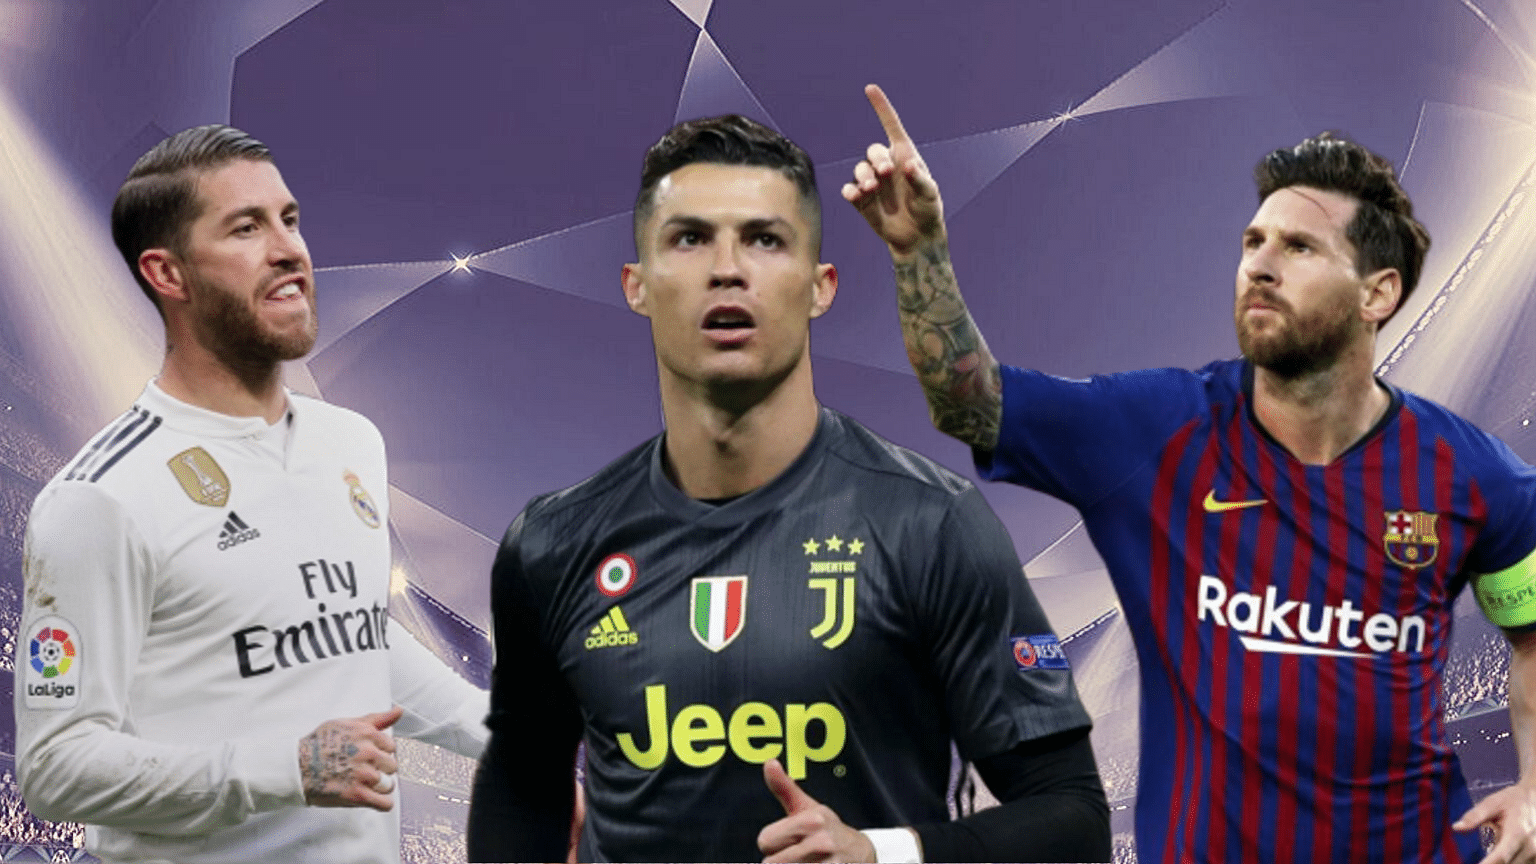 From left to right: Sergio Ramos (Real Madrid), Cristiano Ronaldo (Juventus) and Lionel Messi (Barcelona).